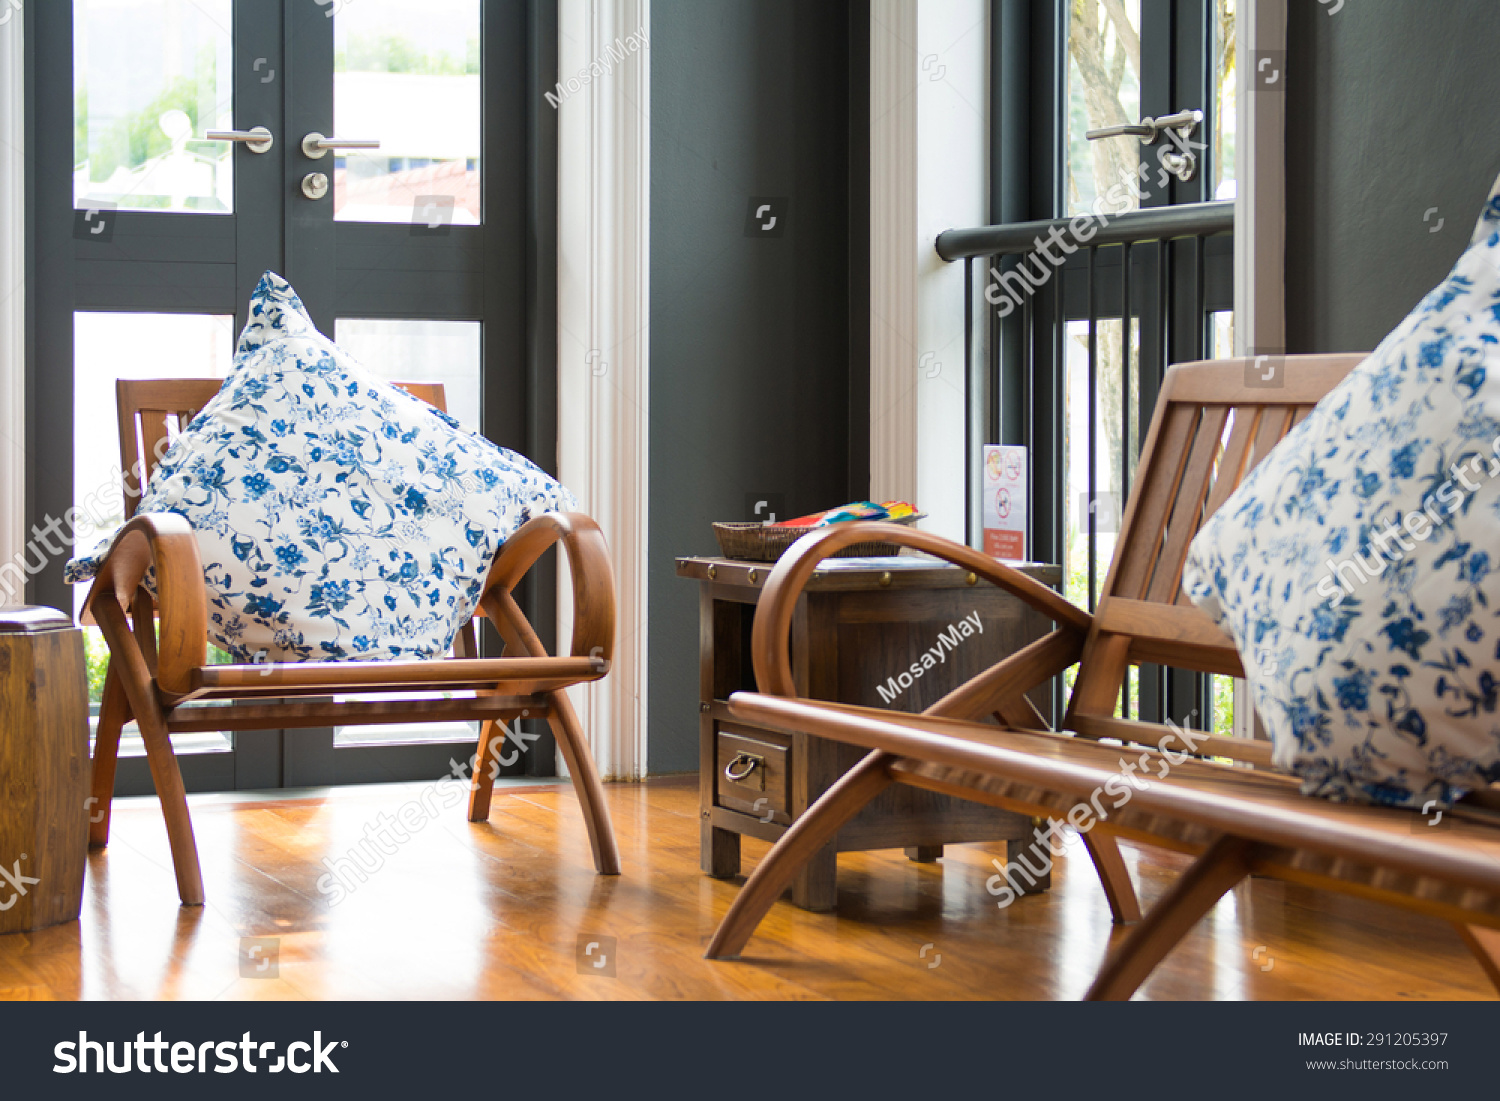 Wooden Chair In Living Room, Decoration Stock Photo 291205397